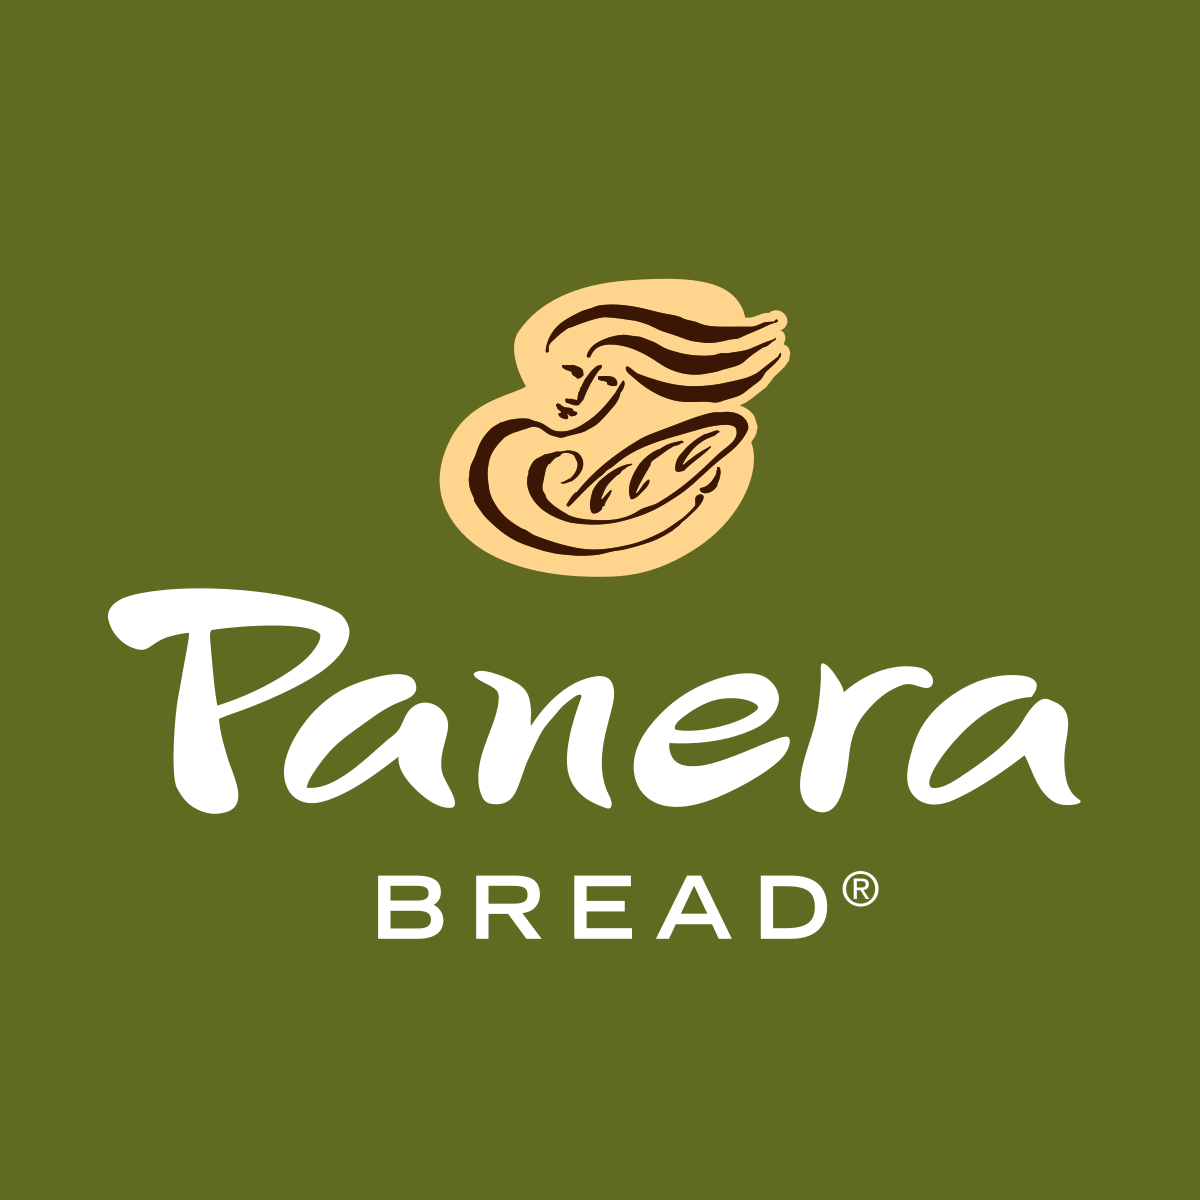 Eat for a Cause at the Auburn Panera Bread on November 13